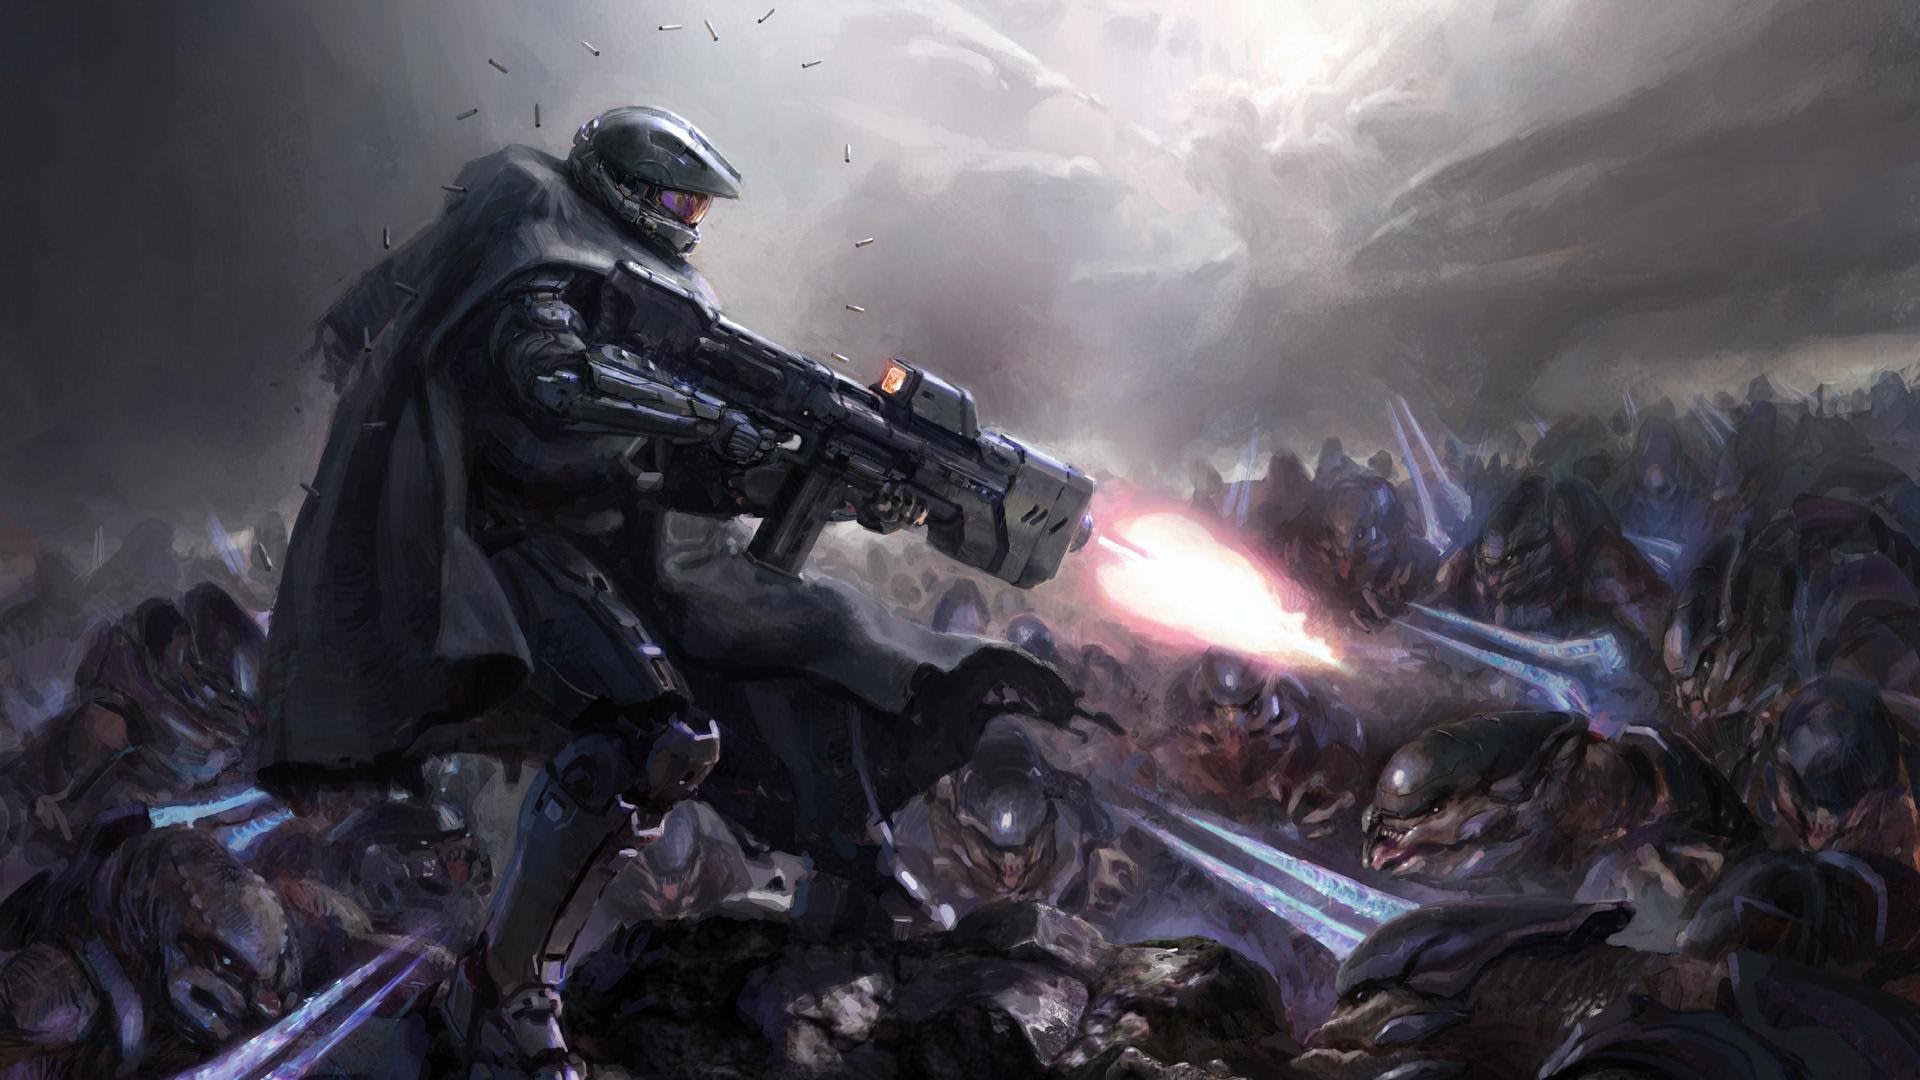 Leaked images of the Halo TV series have emerged